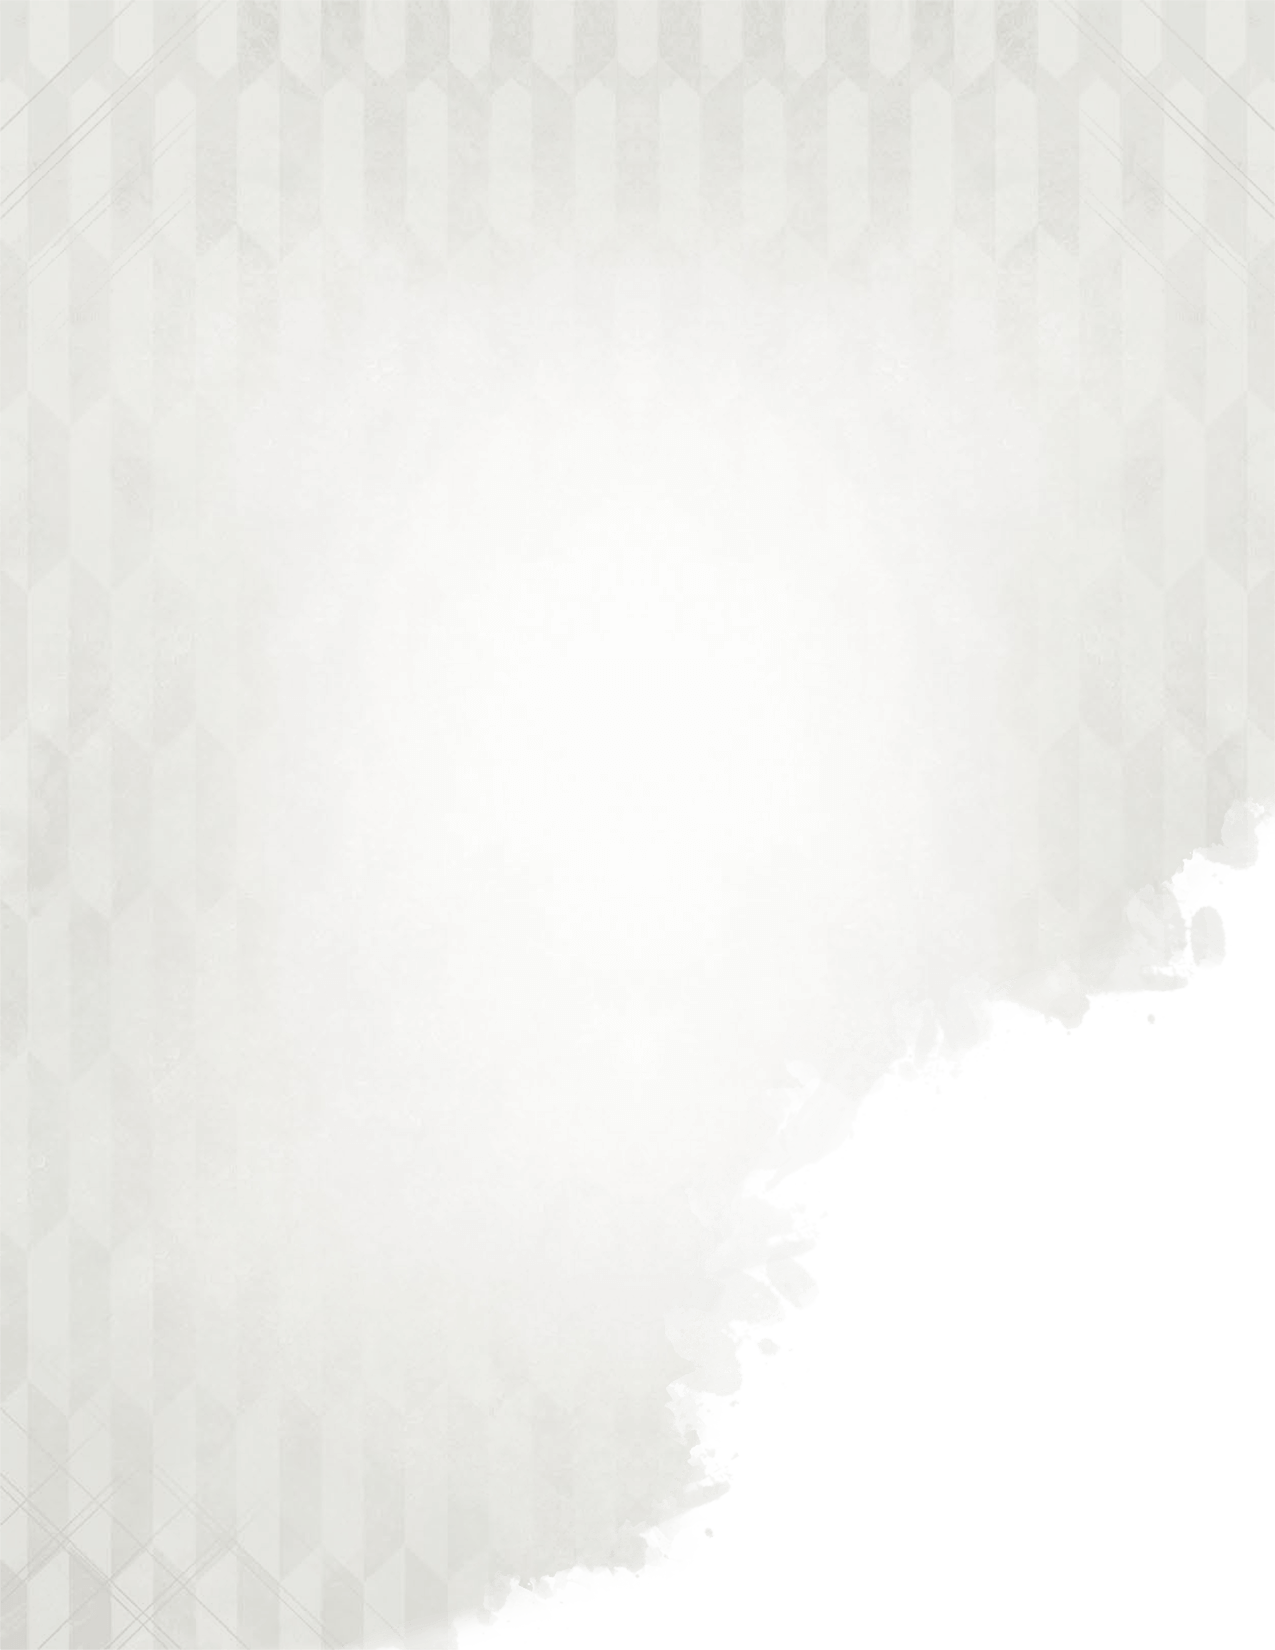 Gm Backgrounds